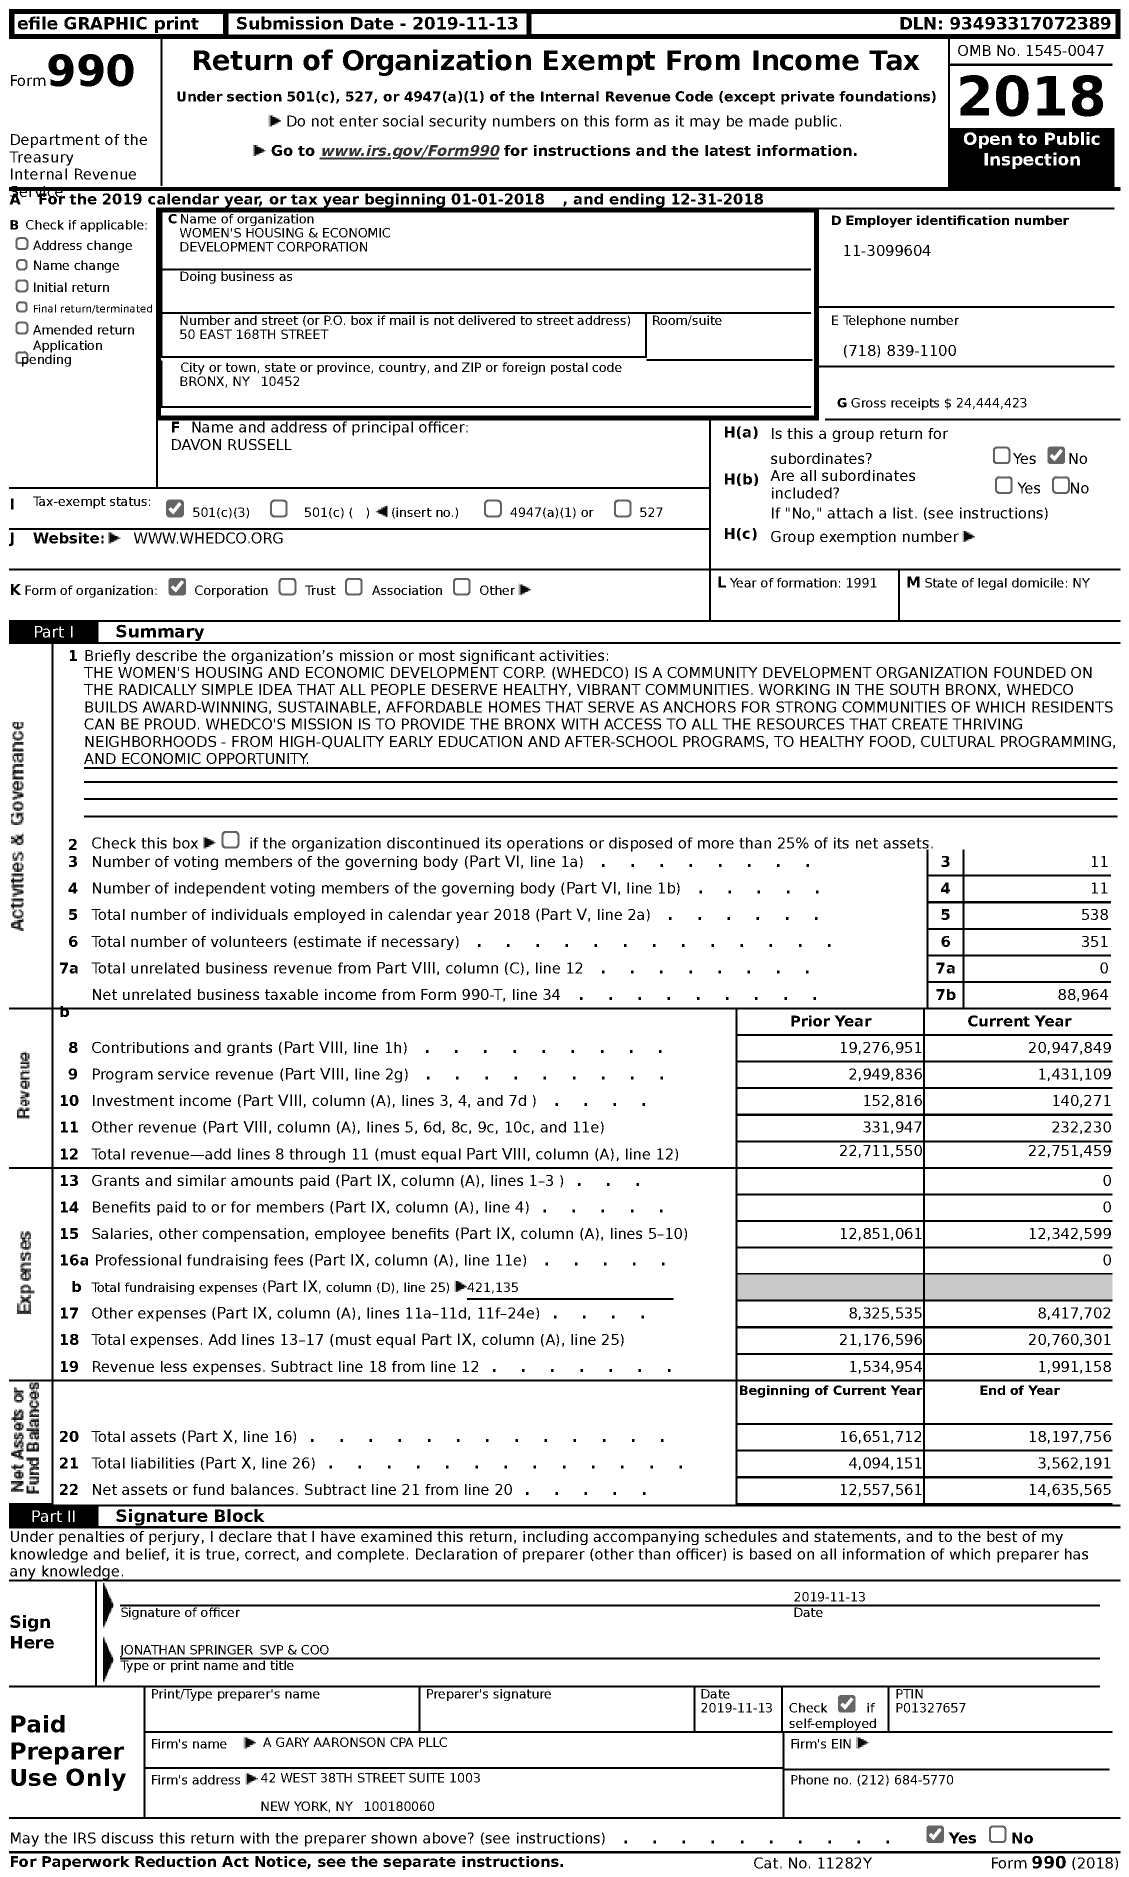 Image of first page of 2018 Form 990 for WOMEN'S Housing and Economic Development Corporation (WHEDco)